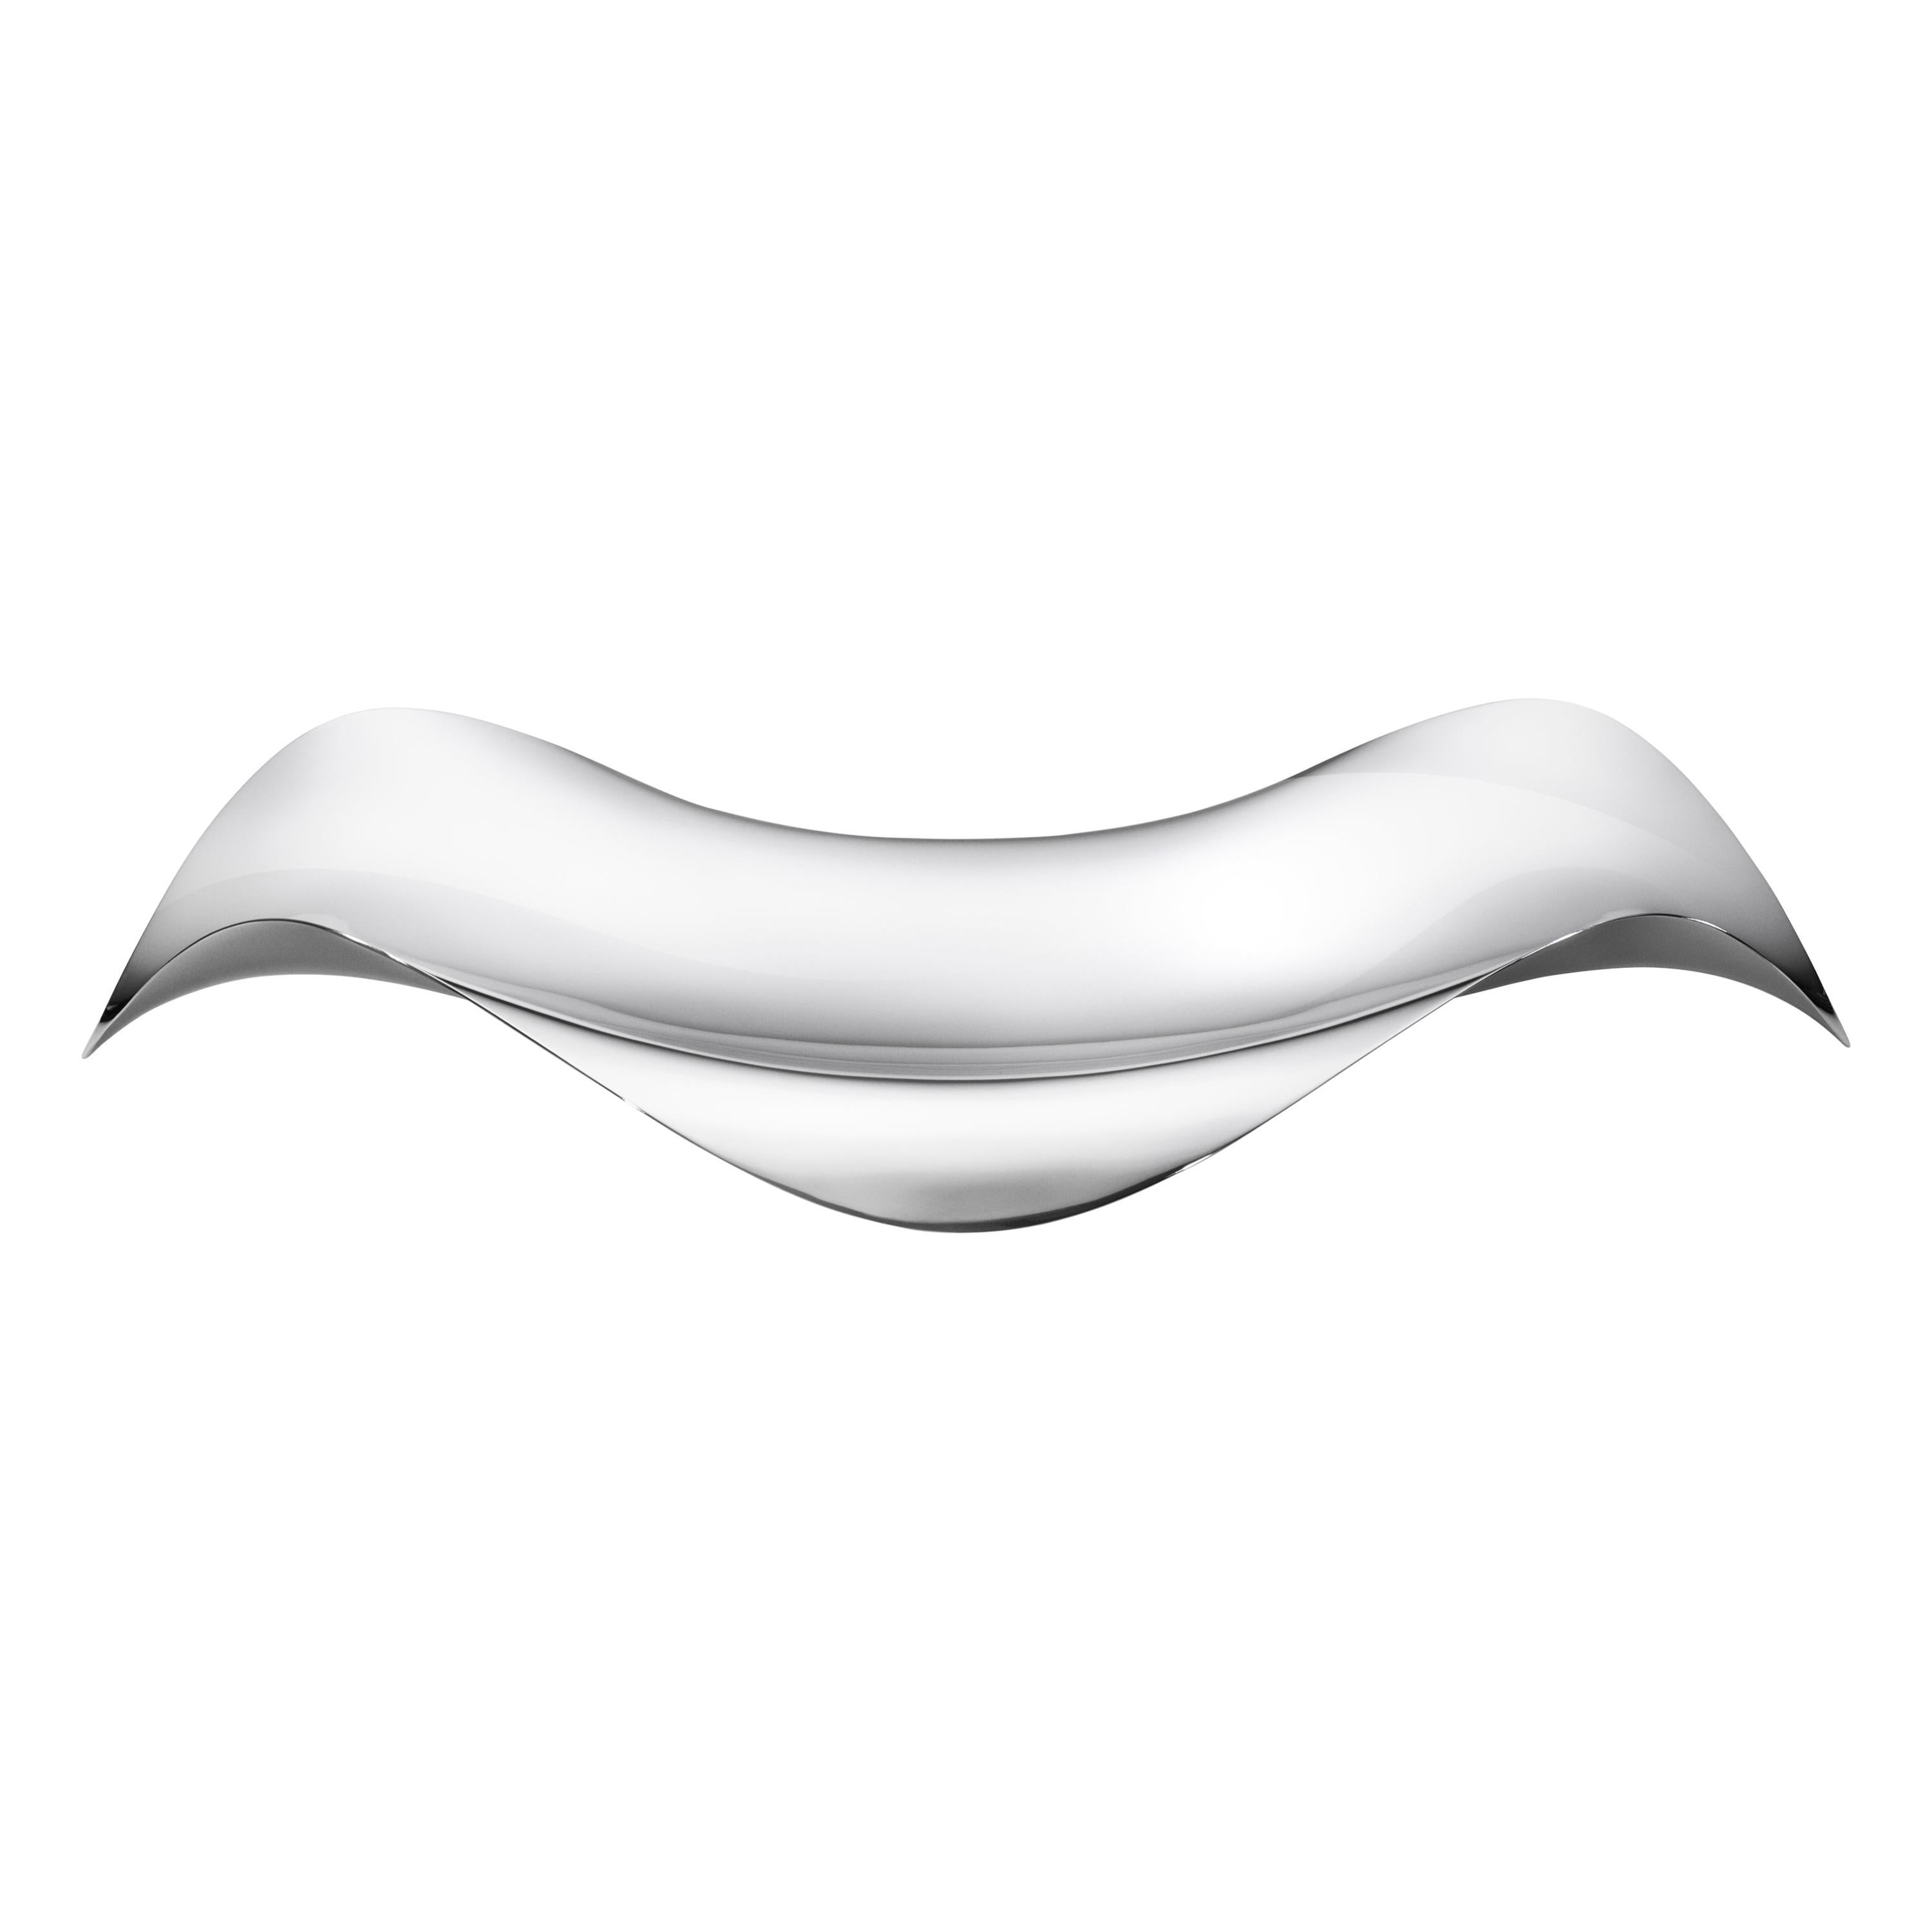 Georg Jensen Cobra Oval Tray in Stainless Steel by Constantin Wortmann For Sale